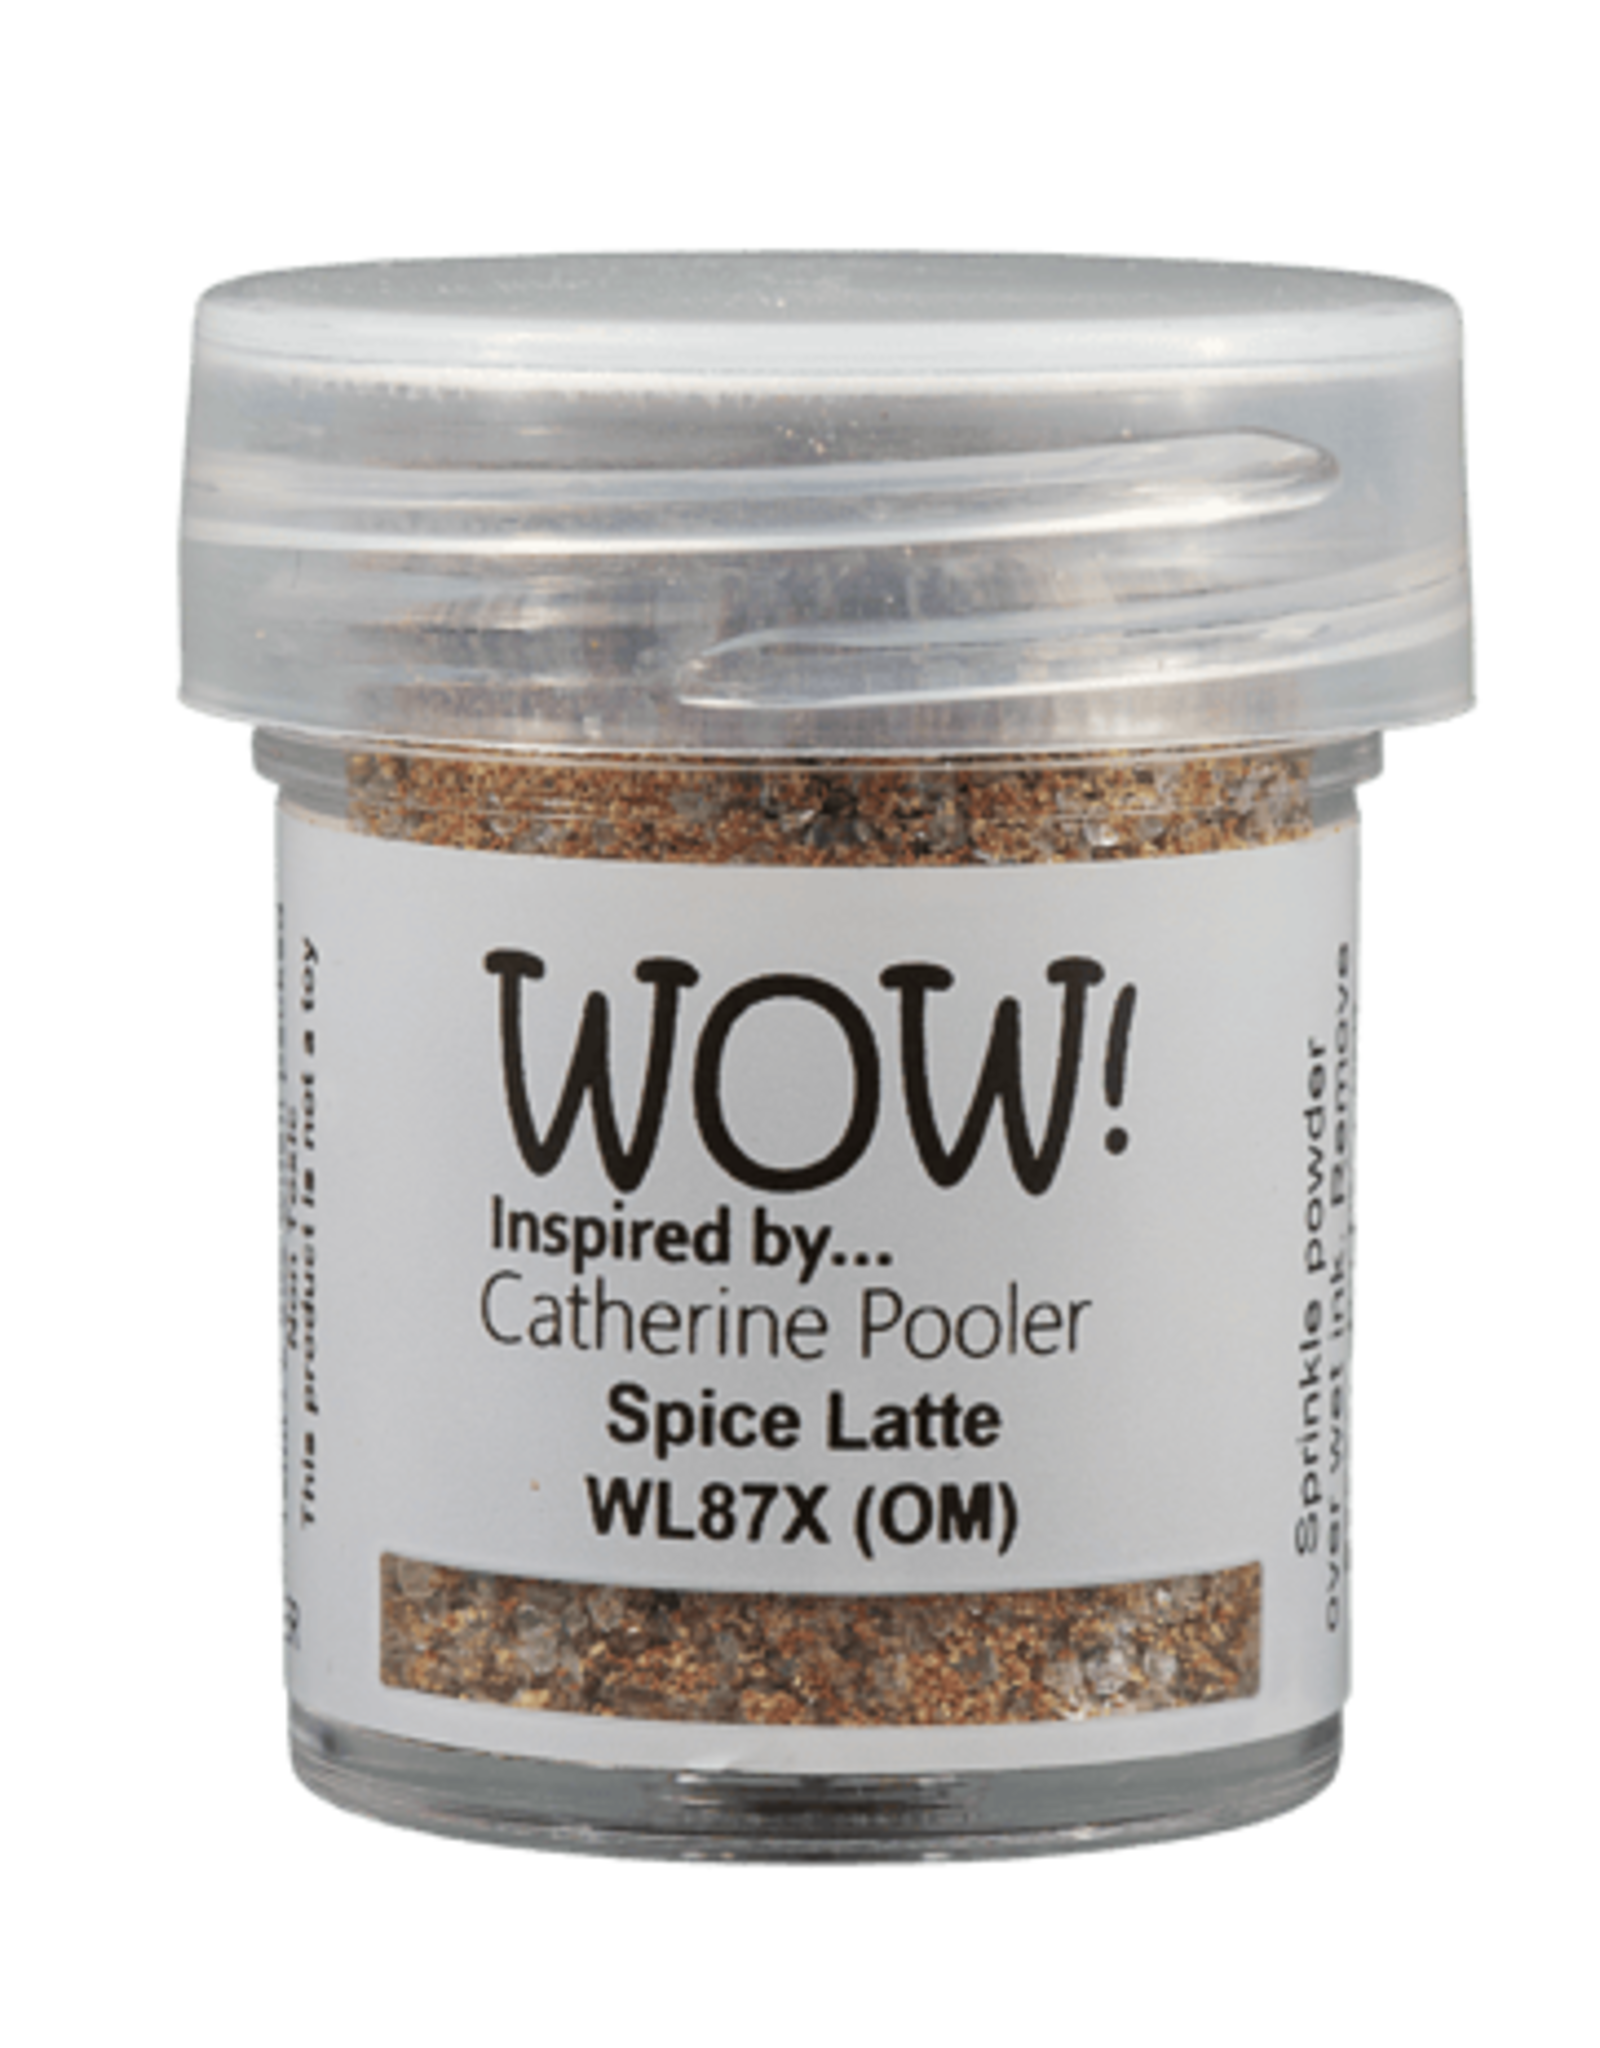 WOW! WOW! CATHERINE POOLER SPICE LATTE EMBOSSING POWDER 0.5OZ